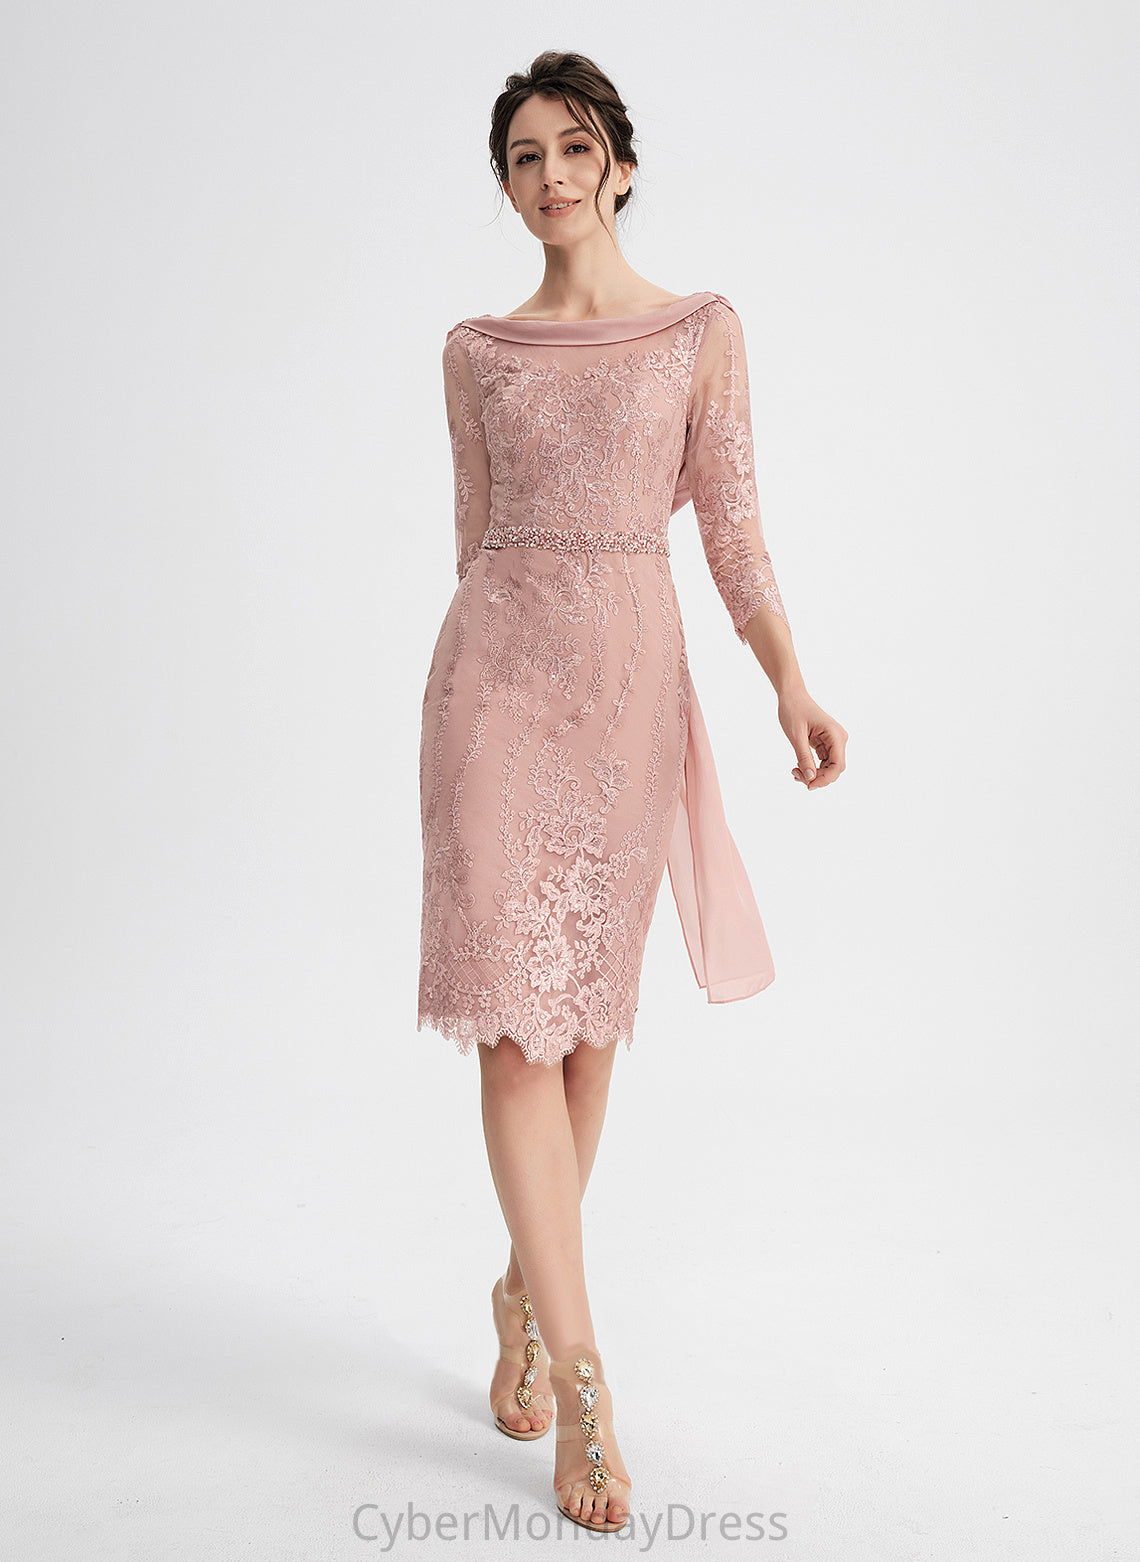 Cocktail Scoop Sheath/Column Dress Cocktail Dresses Neck Sequins Erika Lace Beading With Knee-Length